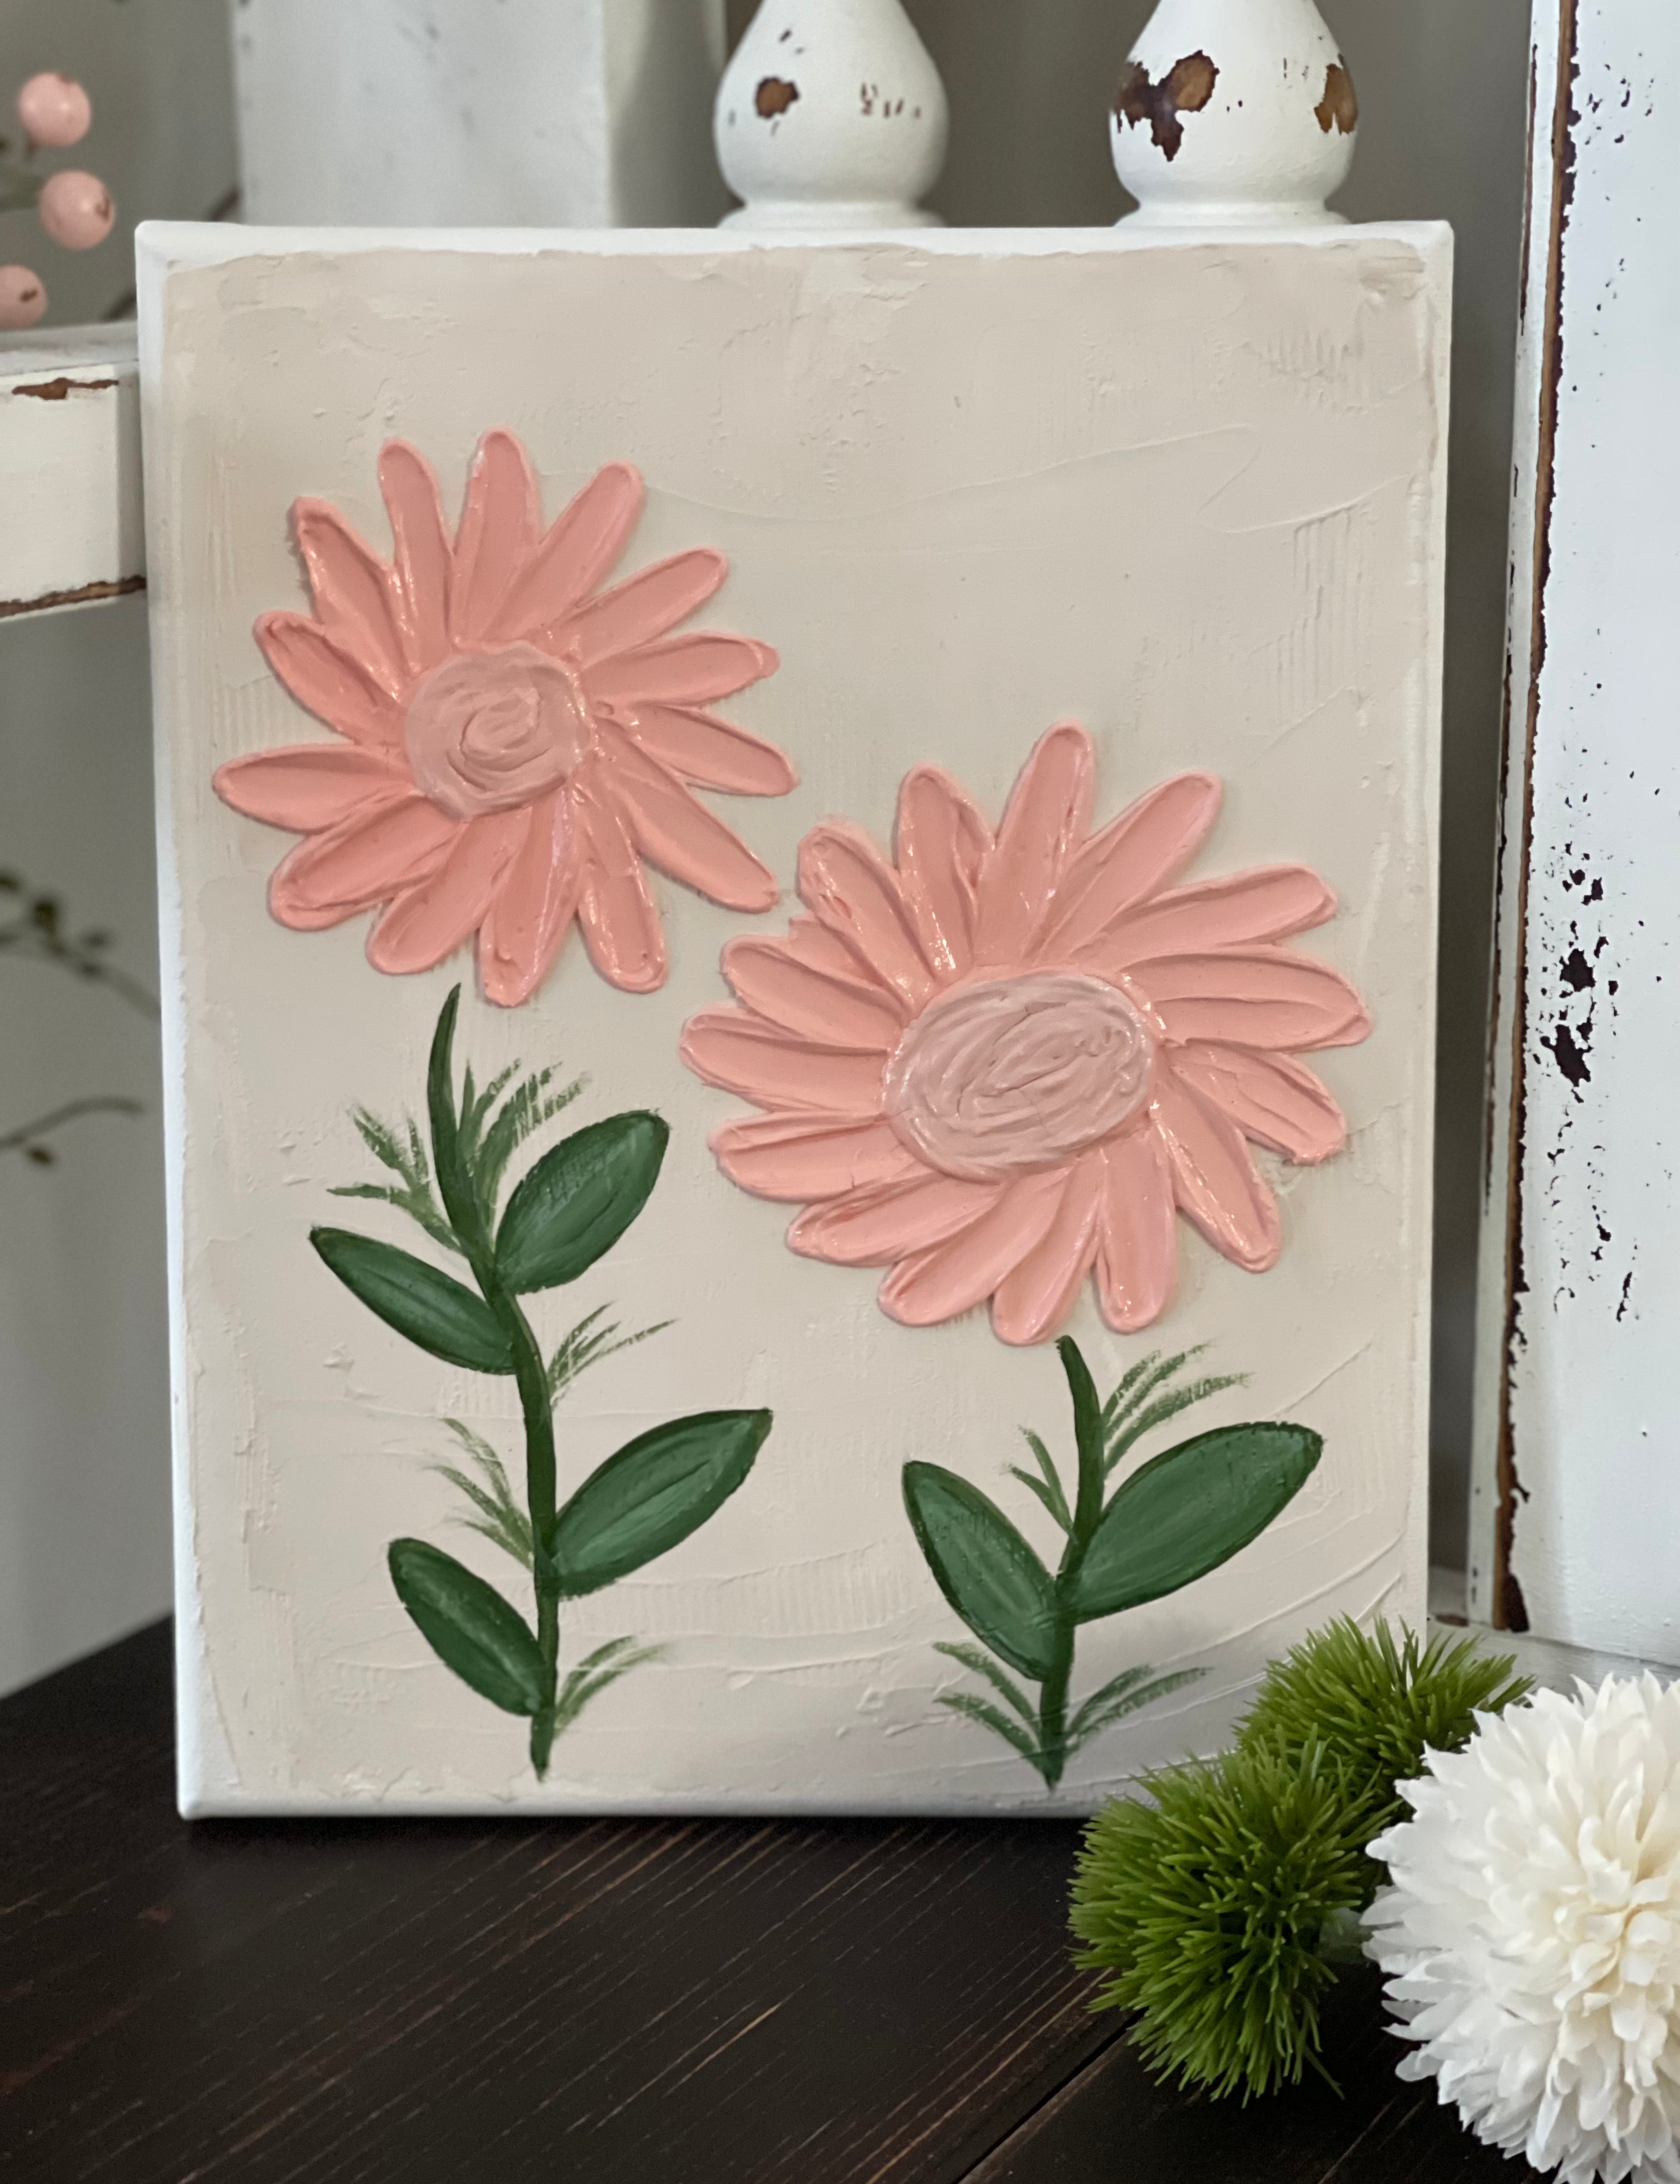 This image shows the hand painted textires pictire with details of the foral design. The flowers sre a pink/peach color, with green stems. 